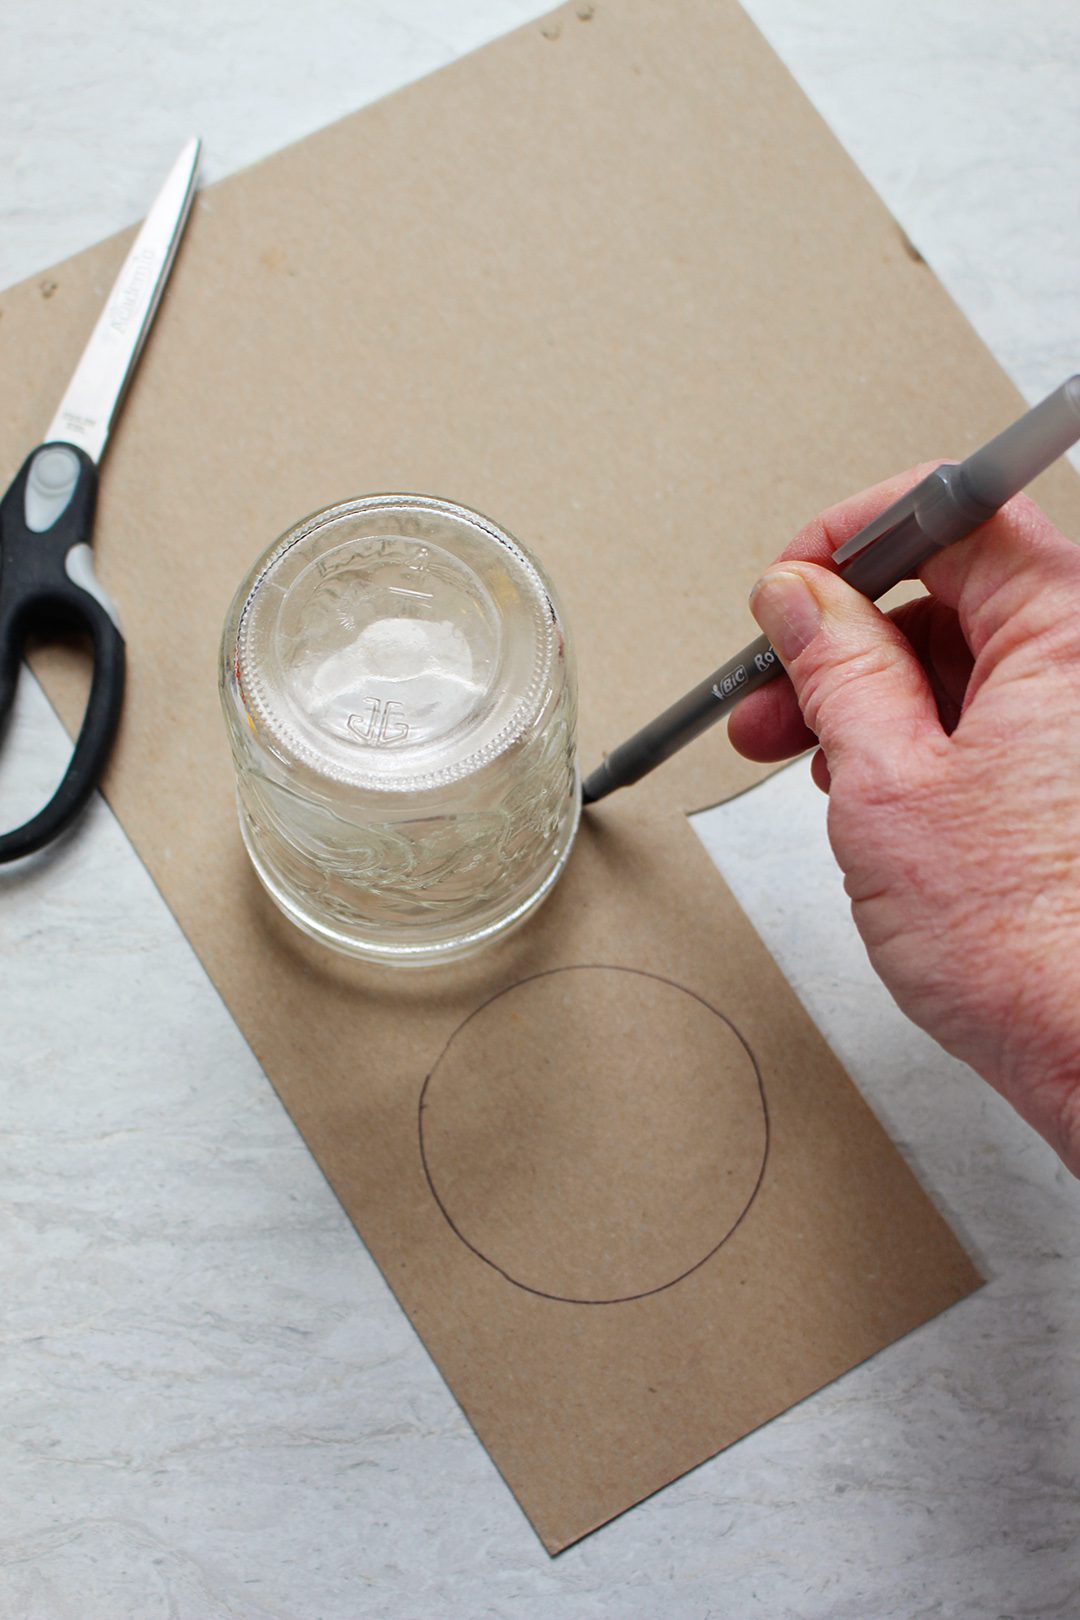 Using a jar to draw a circle on cardboard with a pen, a pair of scissors nearby.